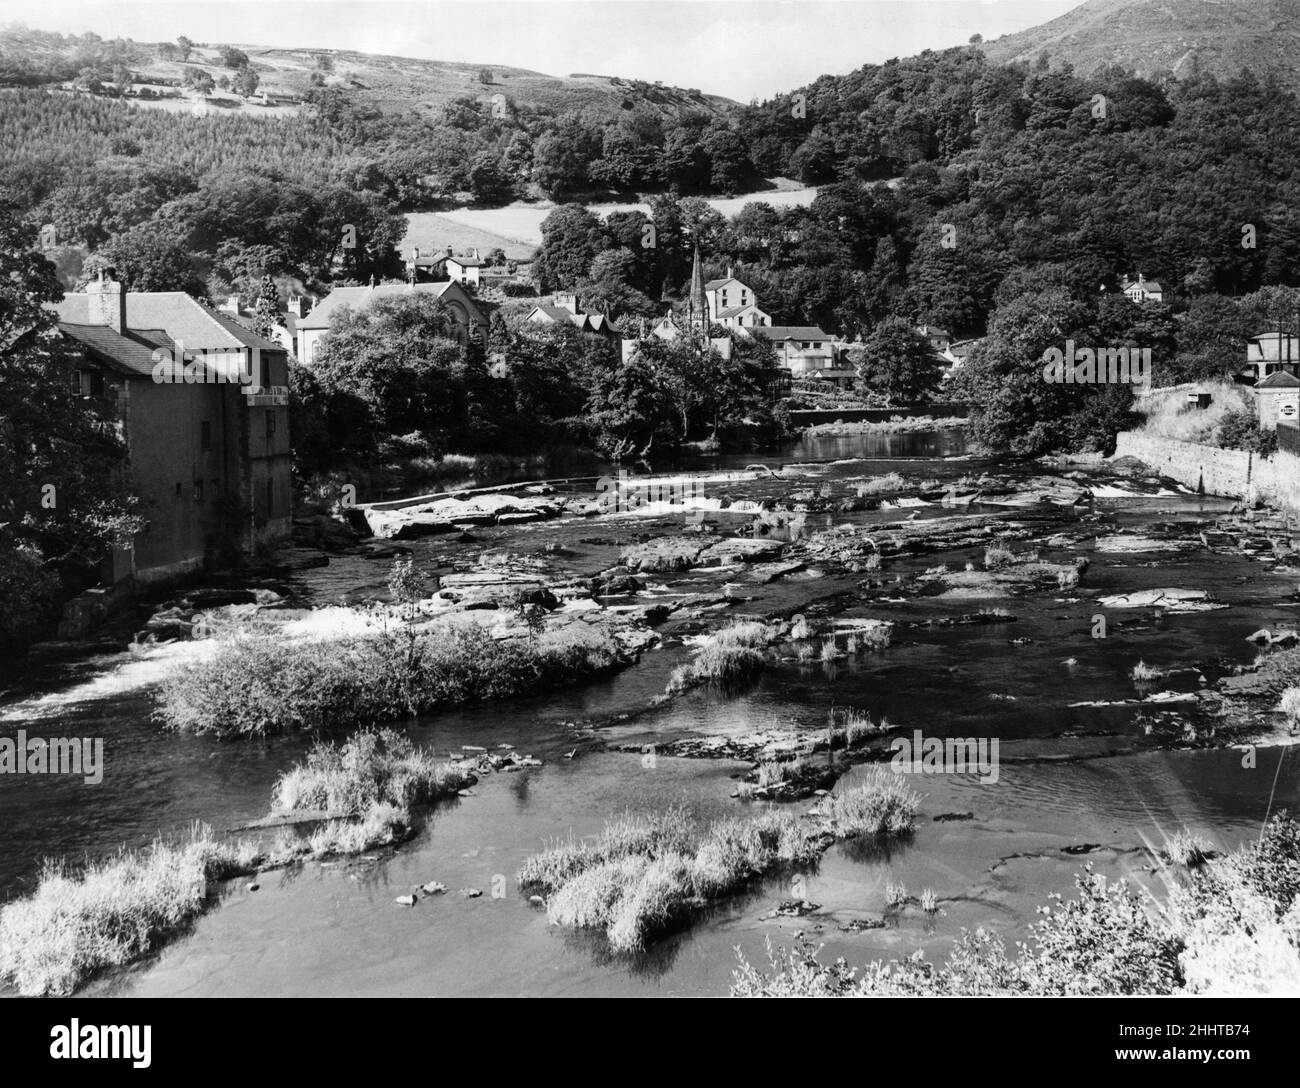 General view showing the River Dee as it meanders through the hill girdled town of Llangollen in Denbighshire, North Wales.October 1943. Stock Photo